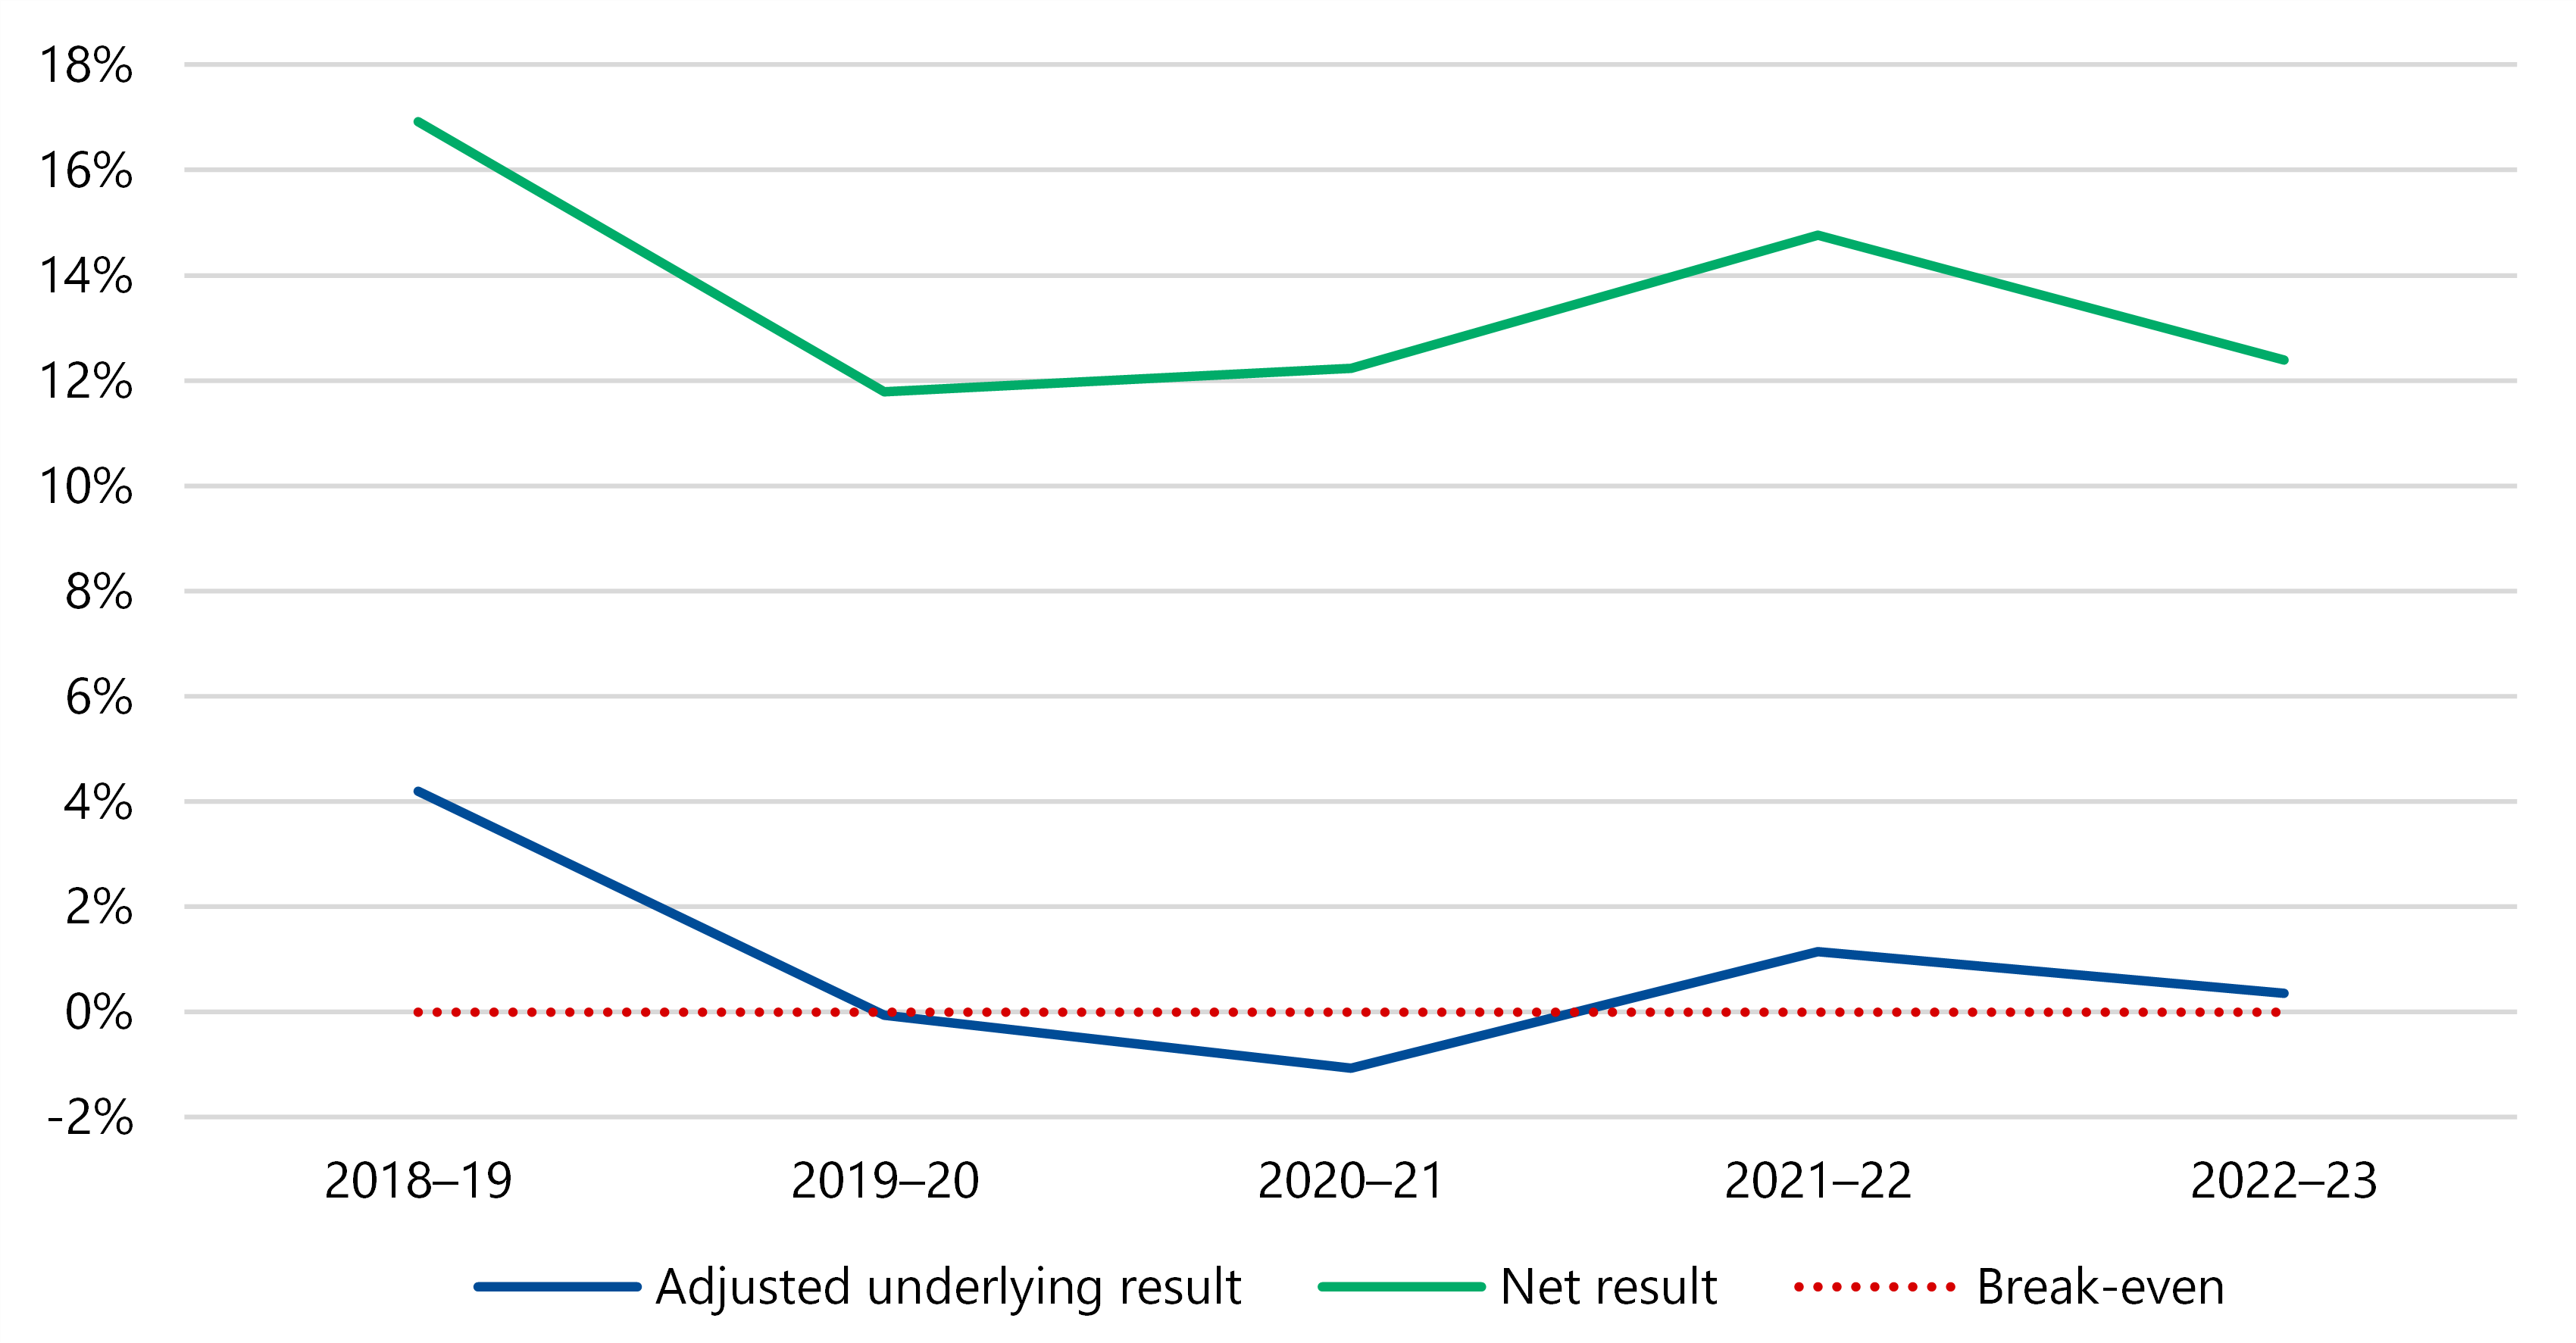 Figure 10 is a stacked line graph showing that councils' net results were around 17% in 2018–19, then dropped to just under 12% in 2019–20, rose slightly to just over 12% in 2020–21, then peaked at a bit under 15% in 2021–22, before dipping to a bit over 12% again in 2022–23. Councils' adjusted underlying results were just over 4% in 2018–19, then dropped to the breakeven point of 0% in 2019–20, dropped further to nearly -1% in 2020–21, then rose back above breakeven to 1% in 2021–22, before dipping to a bit over 0% in 2022–23.